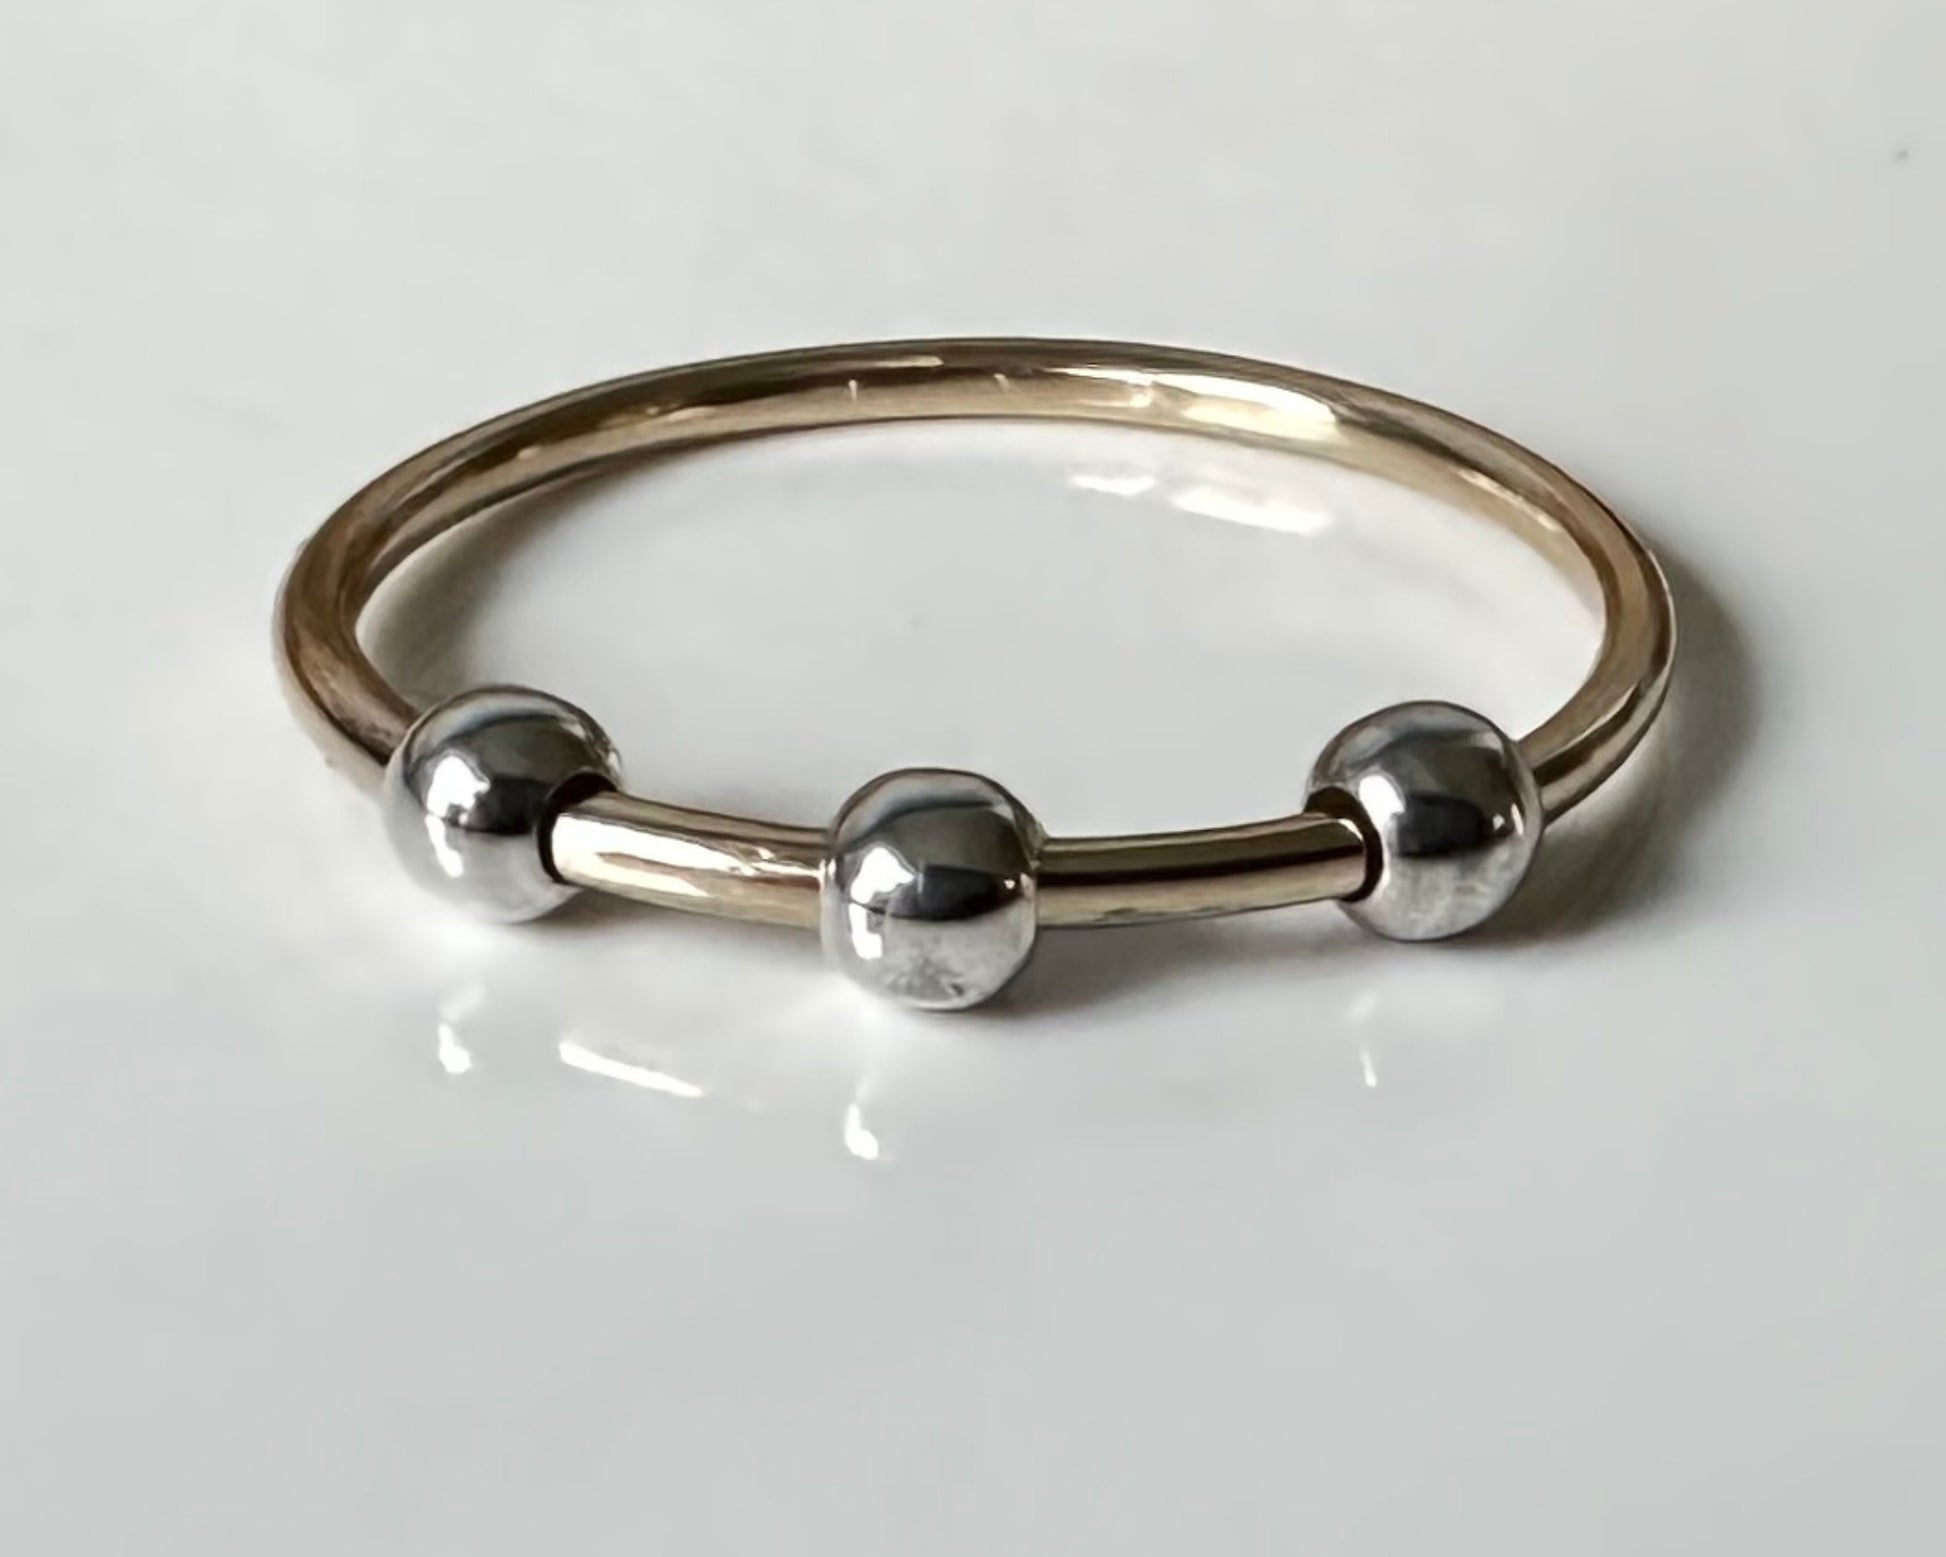 Fidget Ring Handmade from 9ct Gold and Sterling Silver Beads, 1.2mm Gold Stackable Ring Band, Anxiety Ring, Spinner Ring